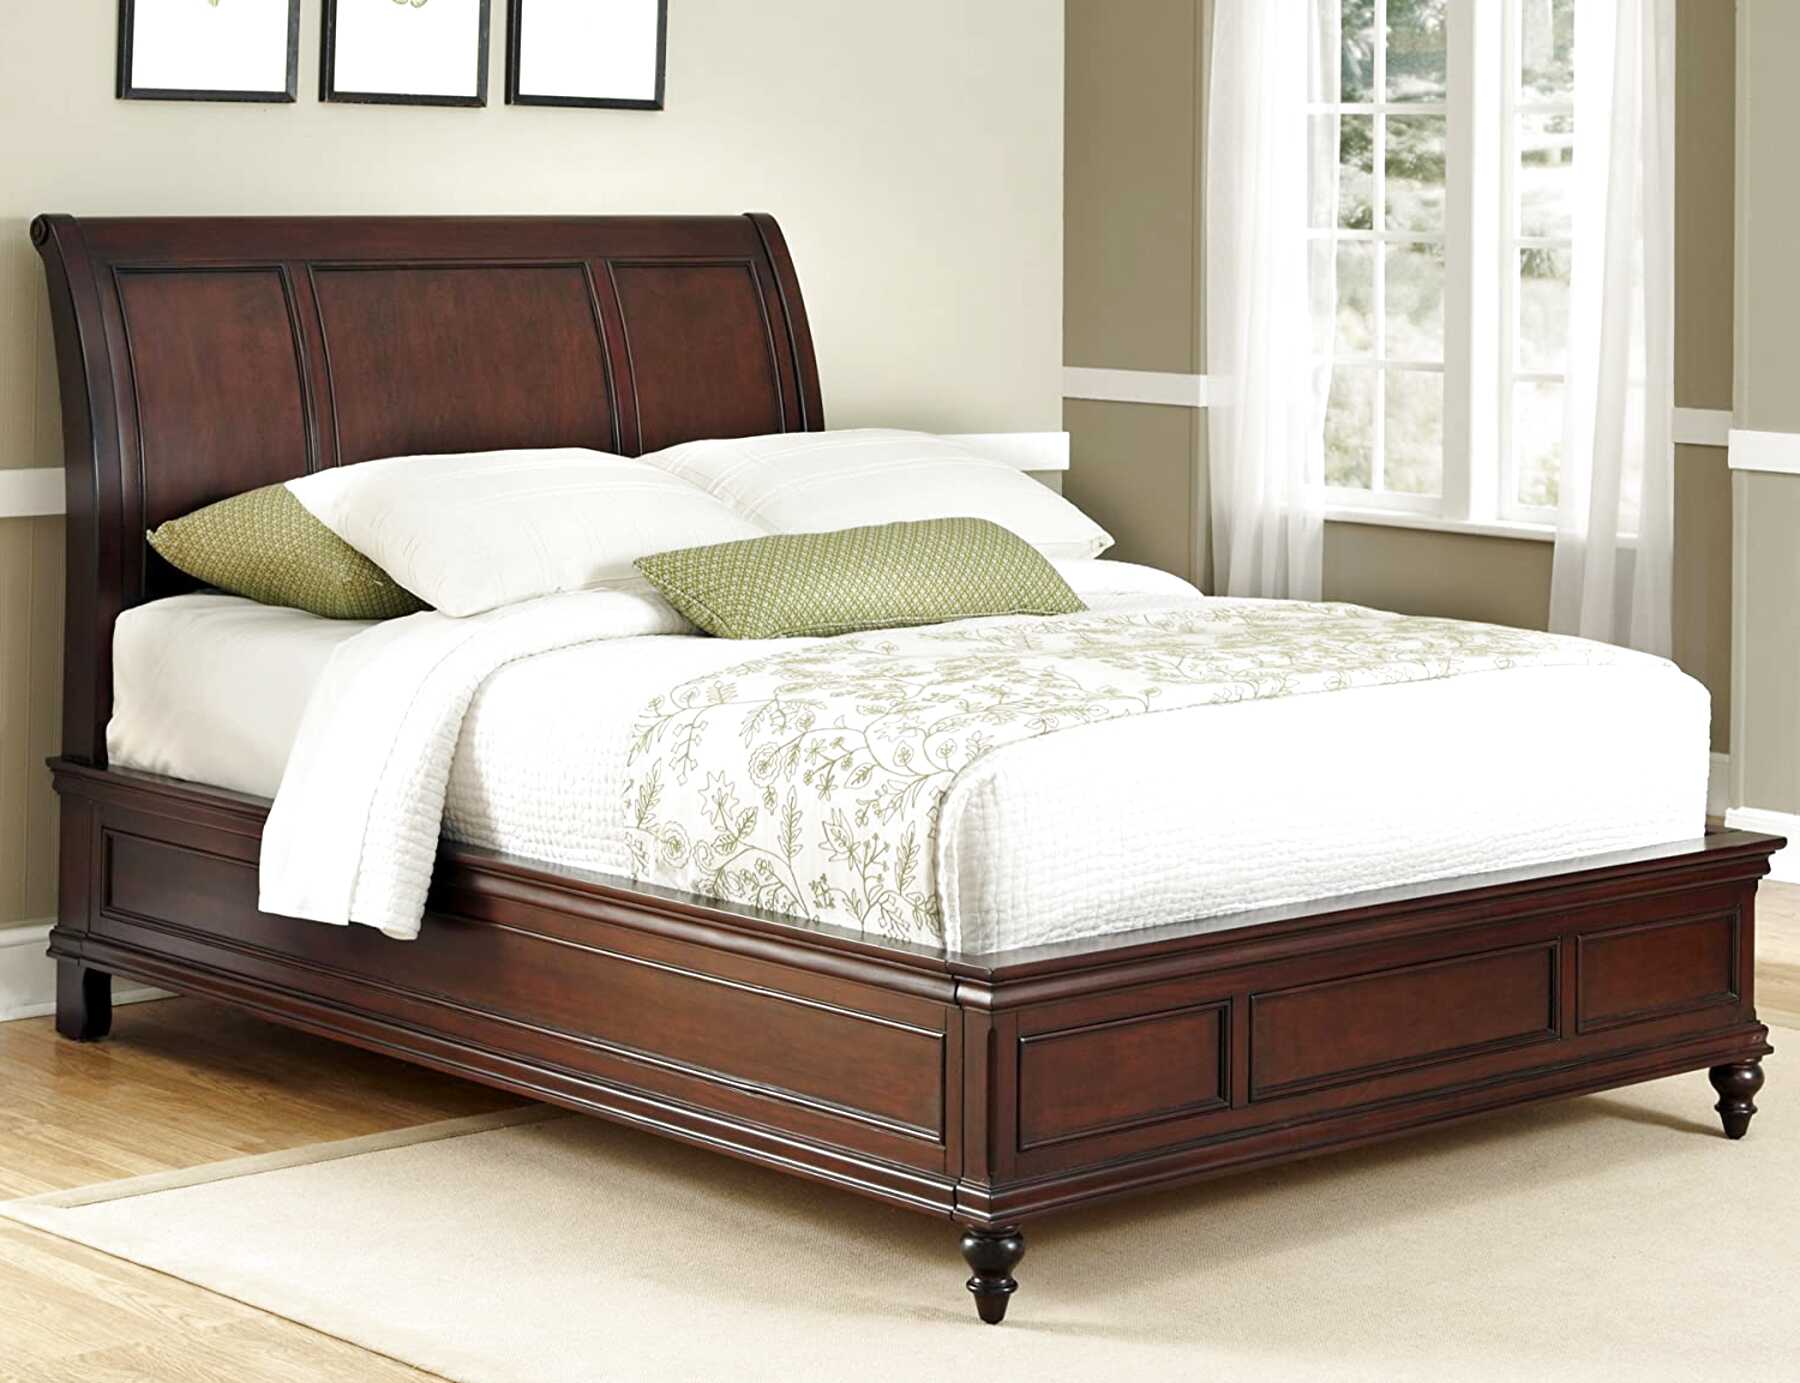 Sleigh King Bed for sale in UK | 91 used Sleigh King Beds